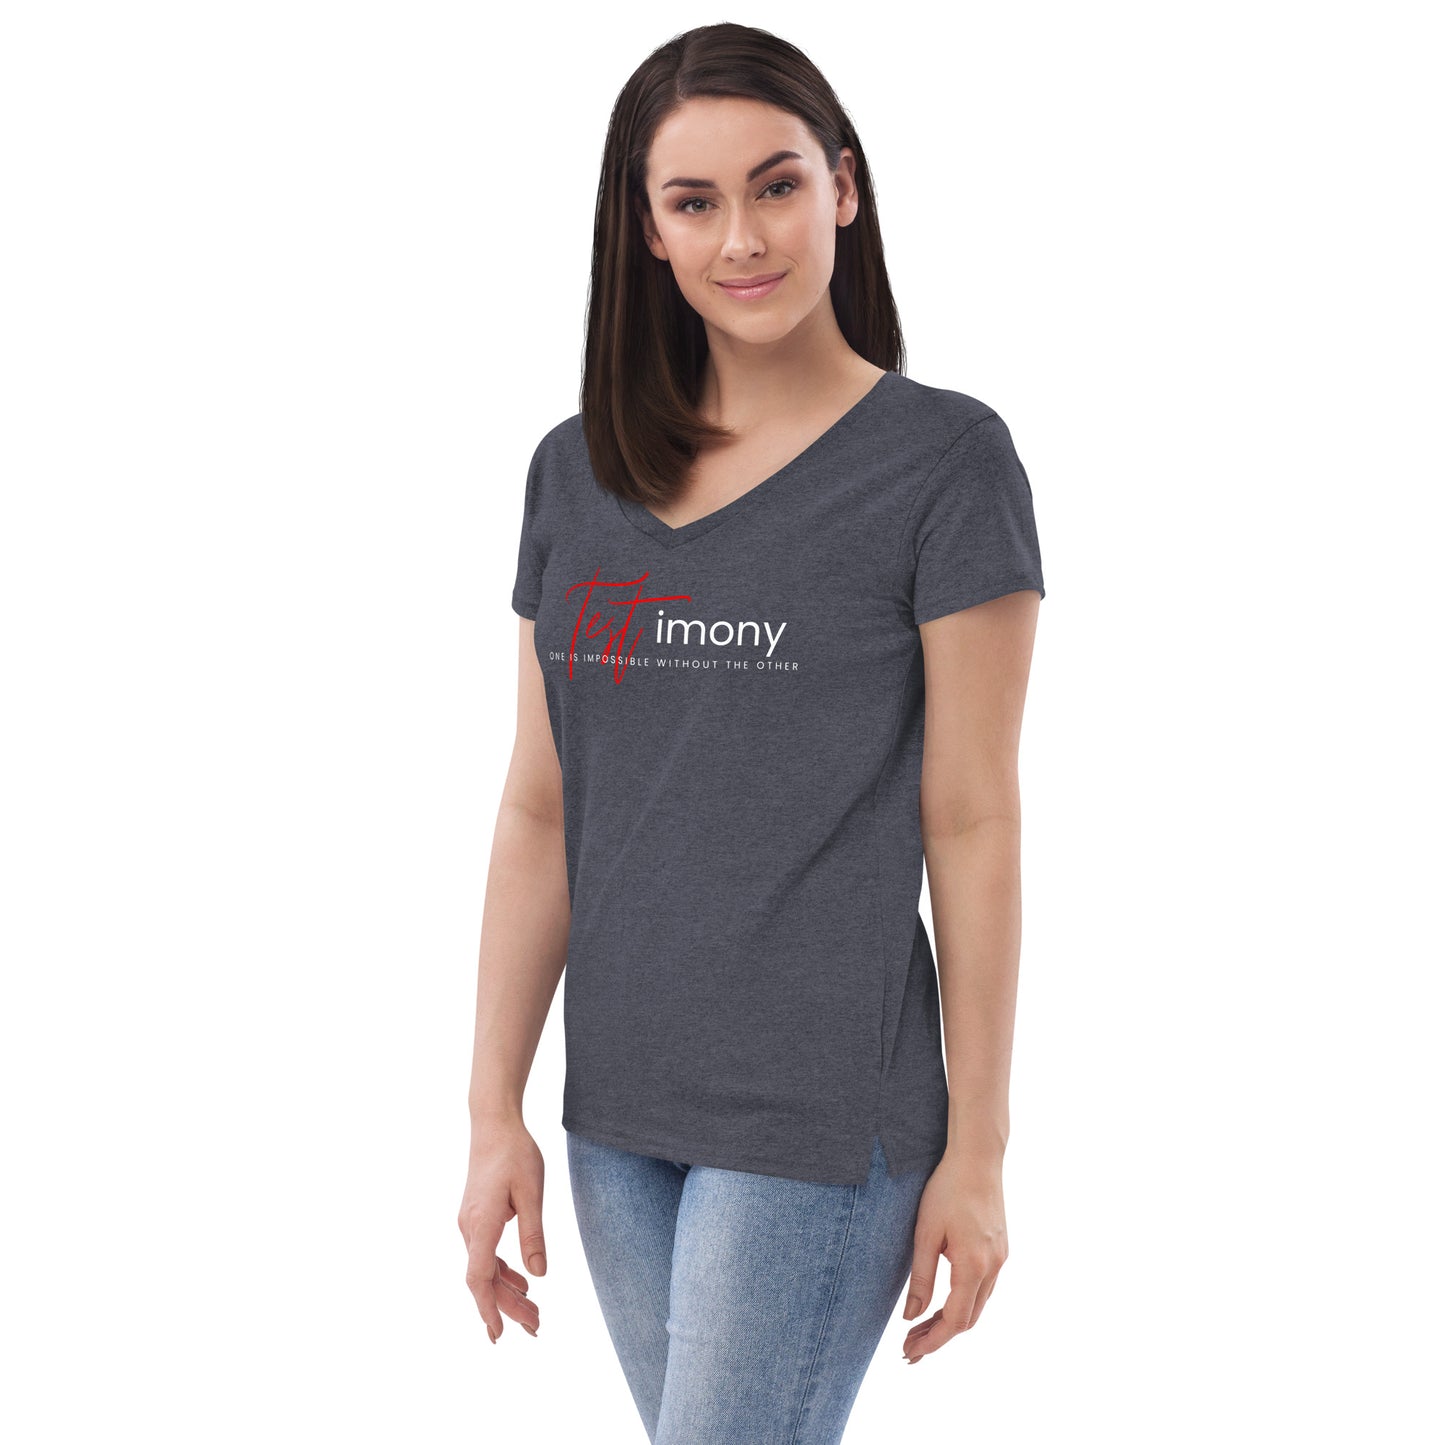 TESTimony "One is Impossible Without the Other Women’s recycled V-Neck T-Shirt